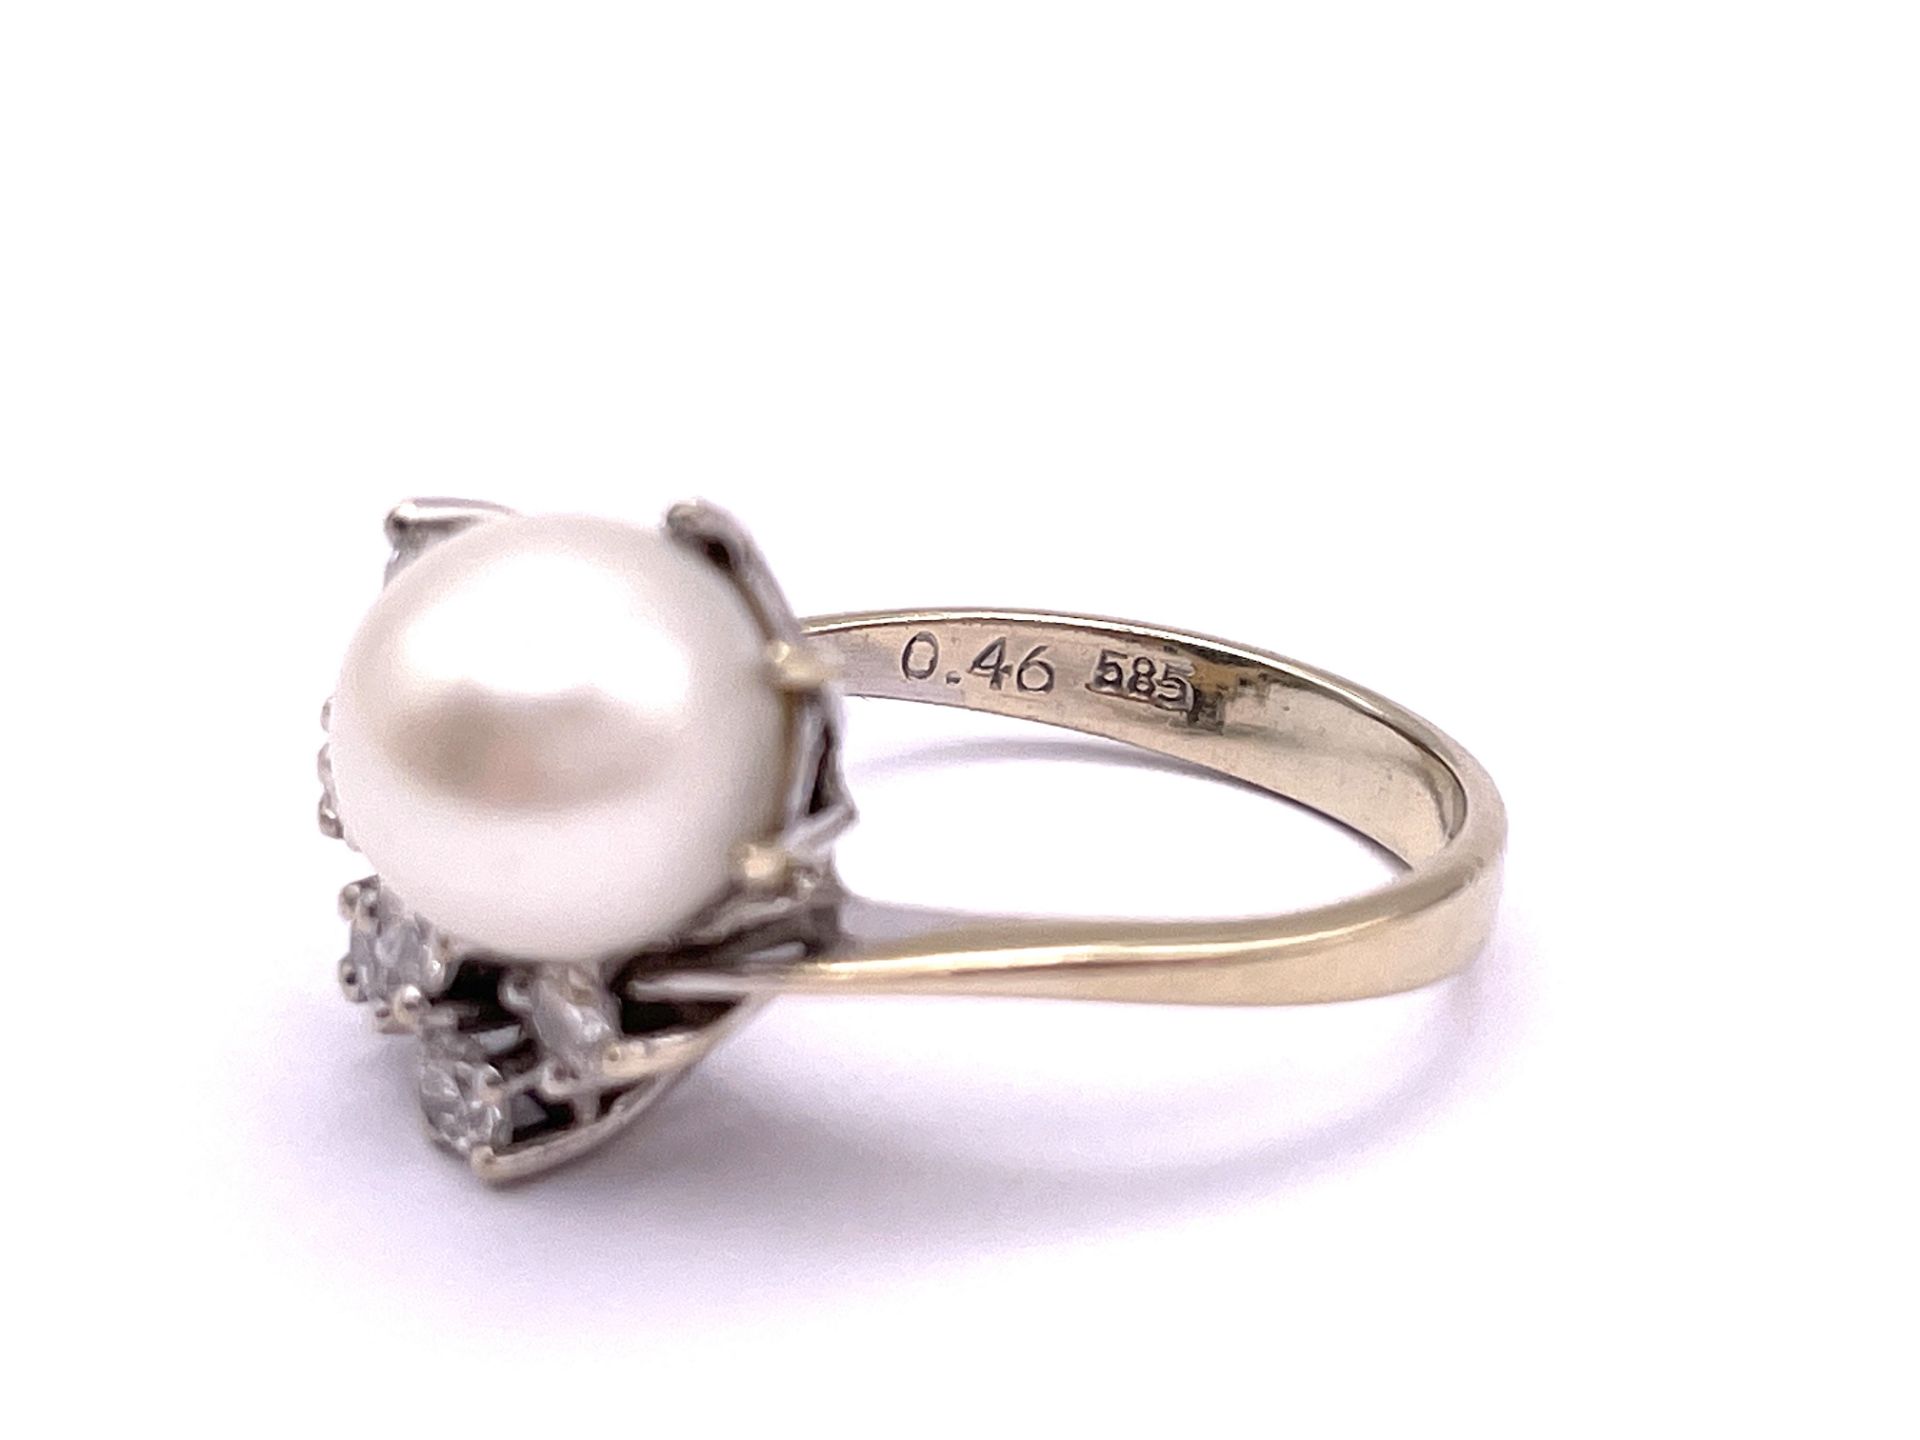 Pearl ring - Image 6 of 7